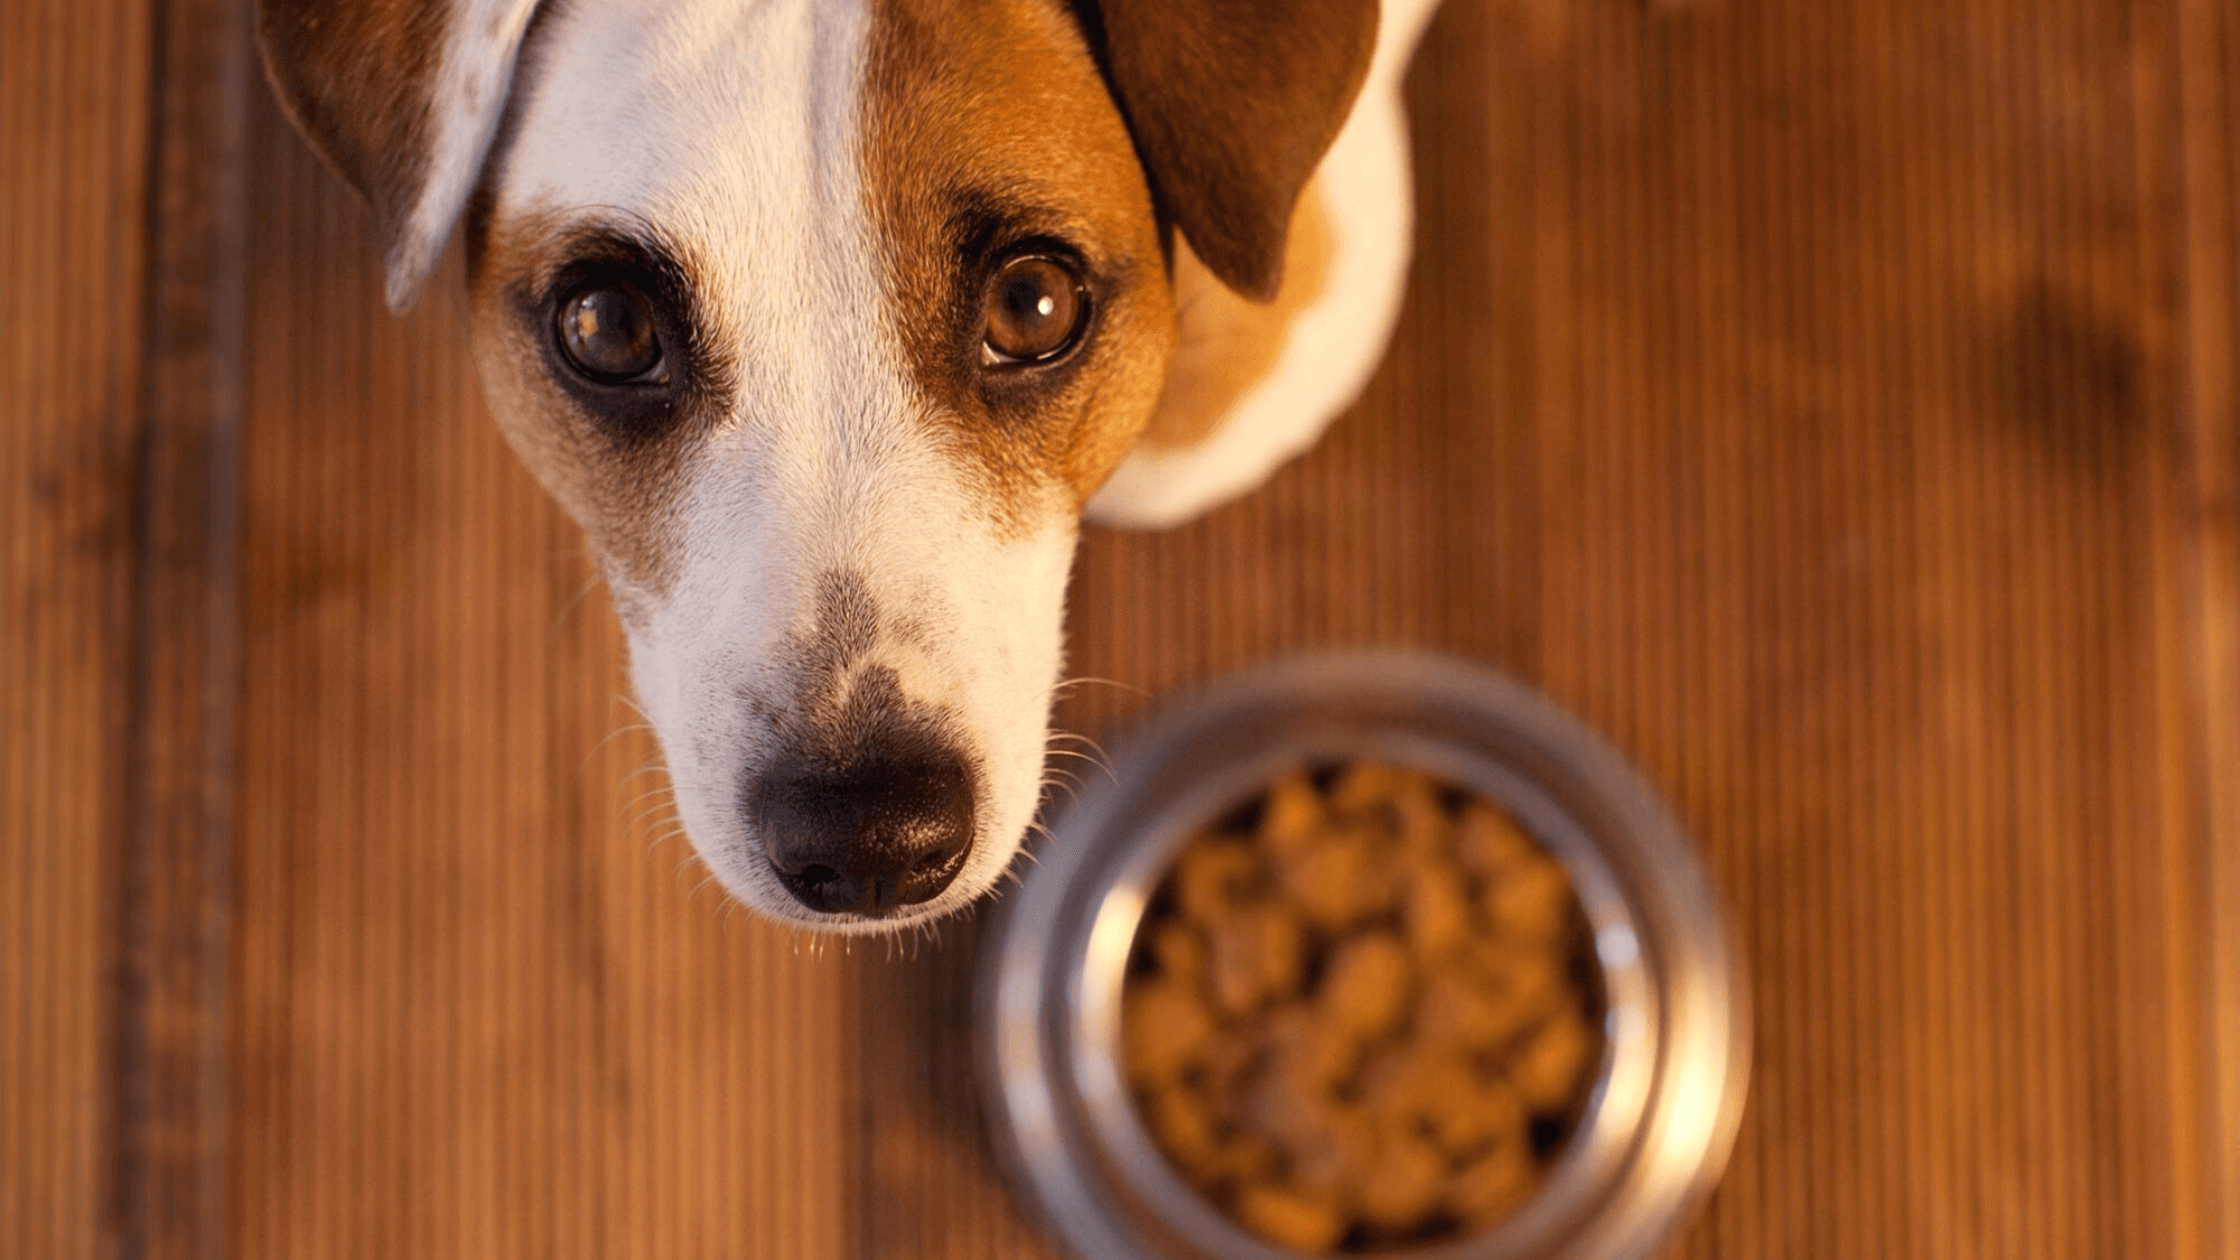 Certain Foods To Pets May Cause Spreading Antibiotic-Resistant Superbugs